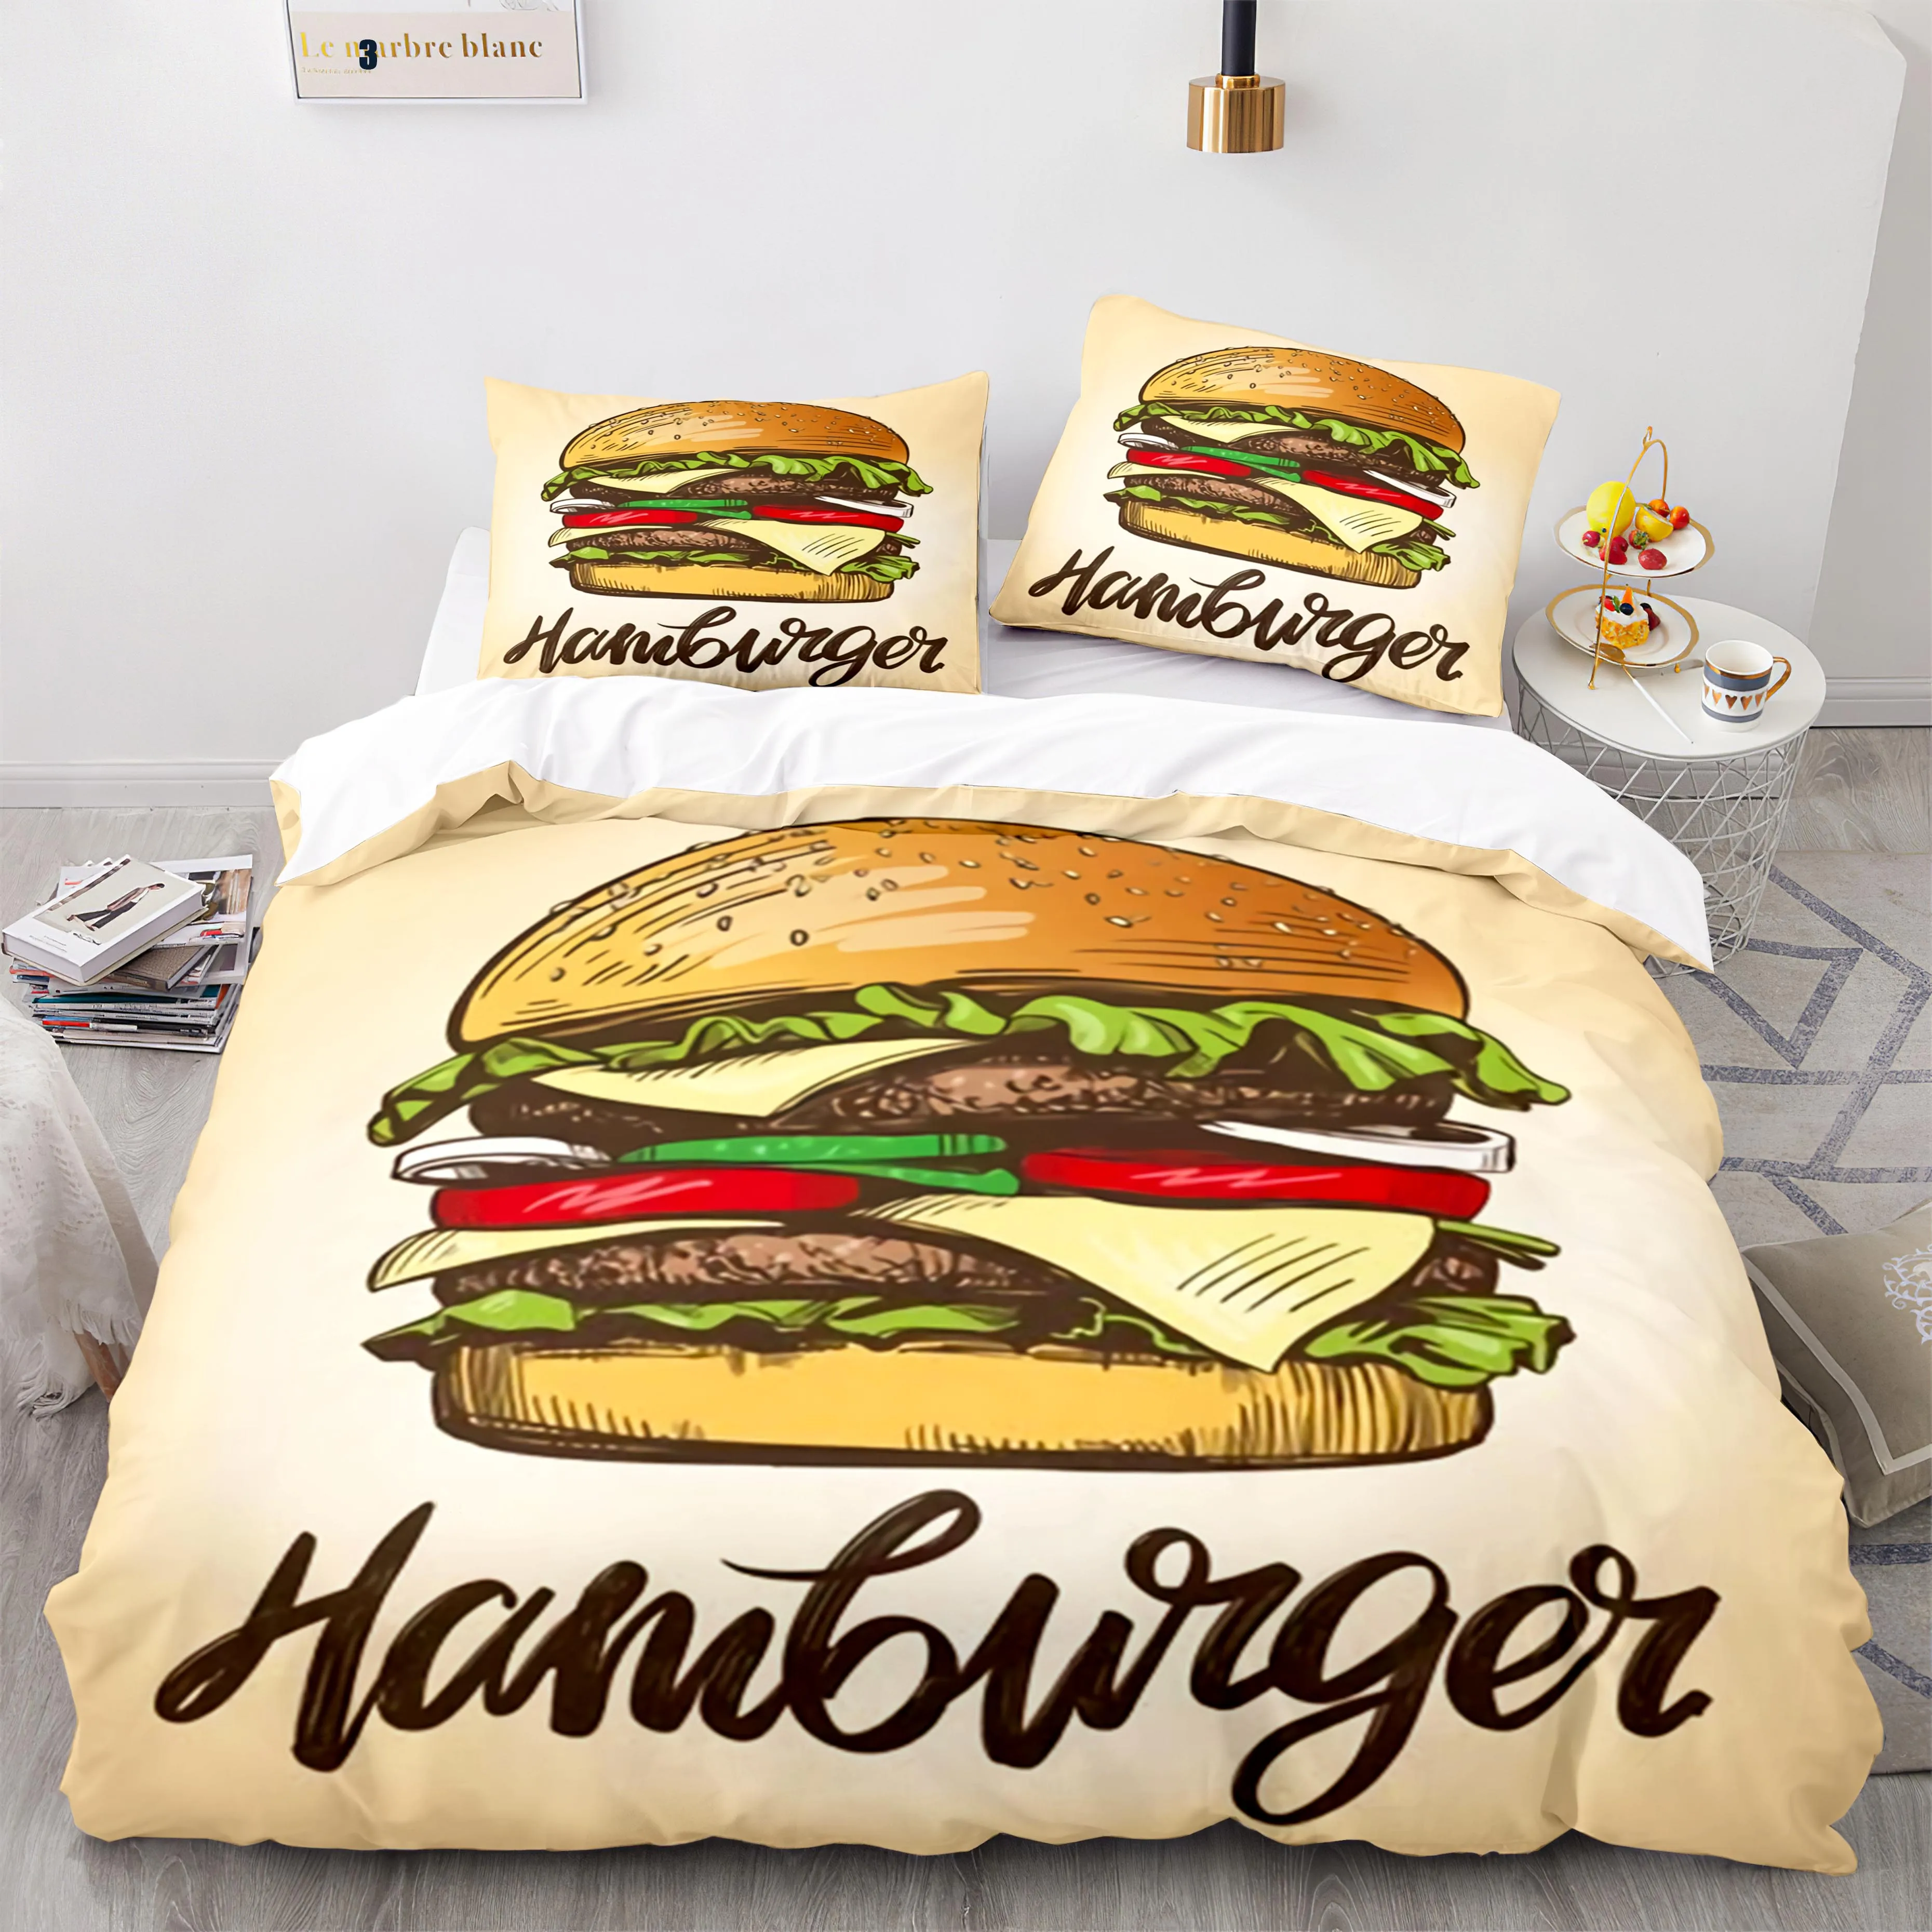 Hamburger King Queen Duvet Cover Fast Food Theme Bedding Set Meat Cheese Quilt Cover Kids Lovely Cartoon Style Comforter Cover